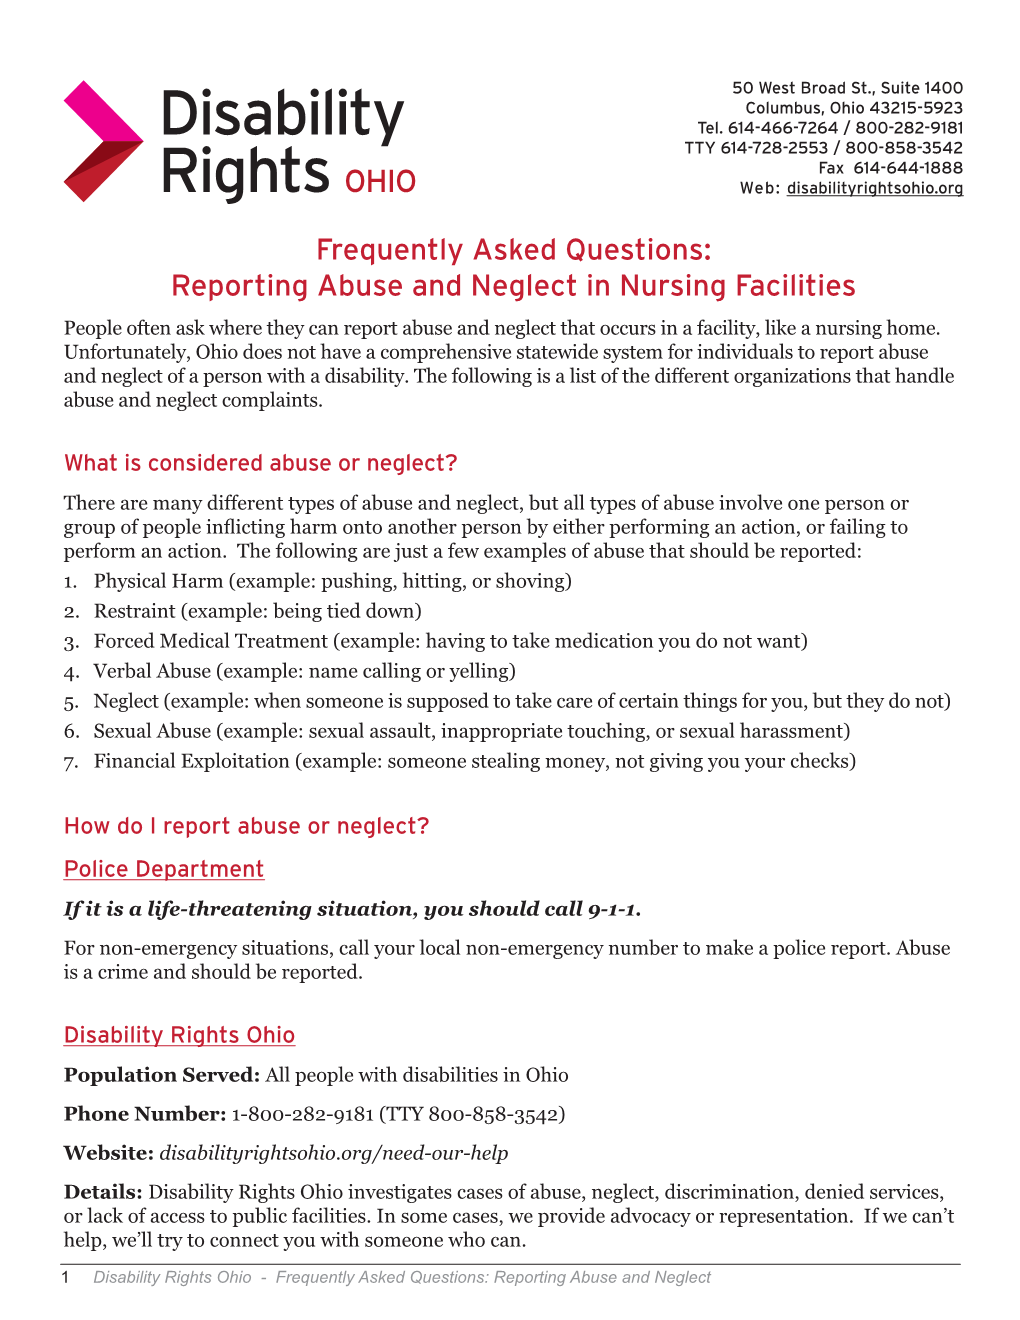 Frequently Asked Questions: Reporting Abuse and Neglect in Nursing Facilities